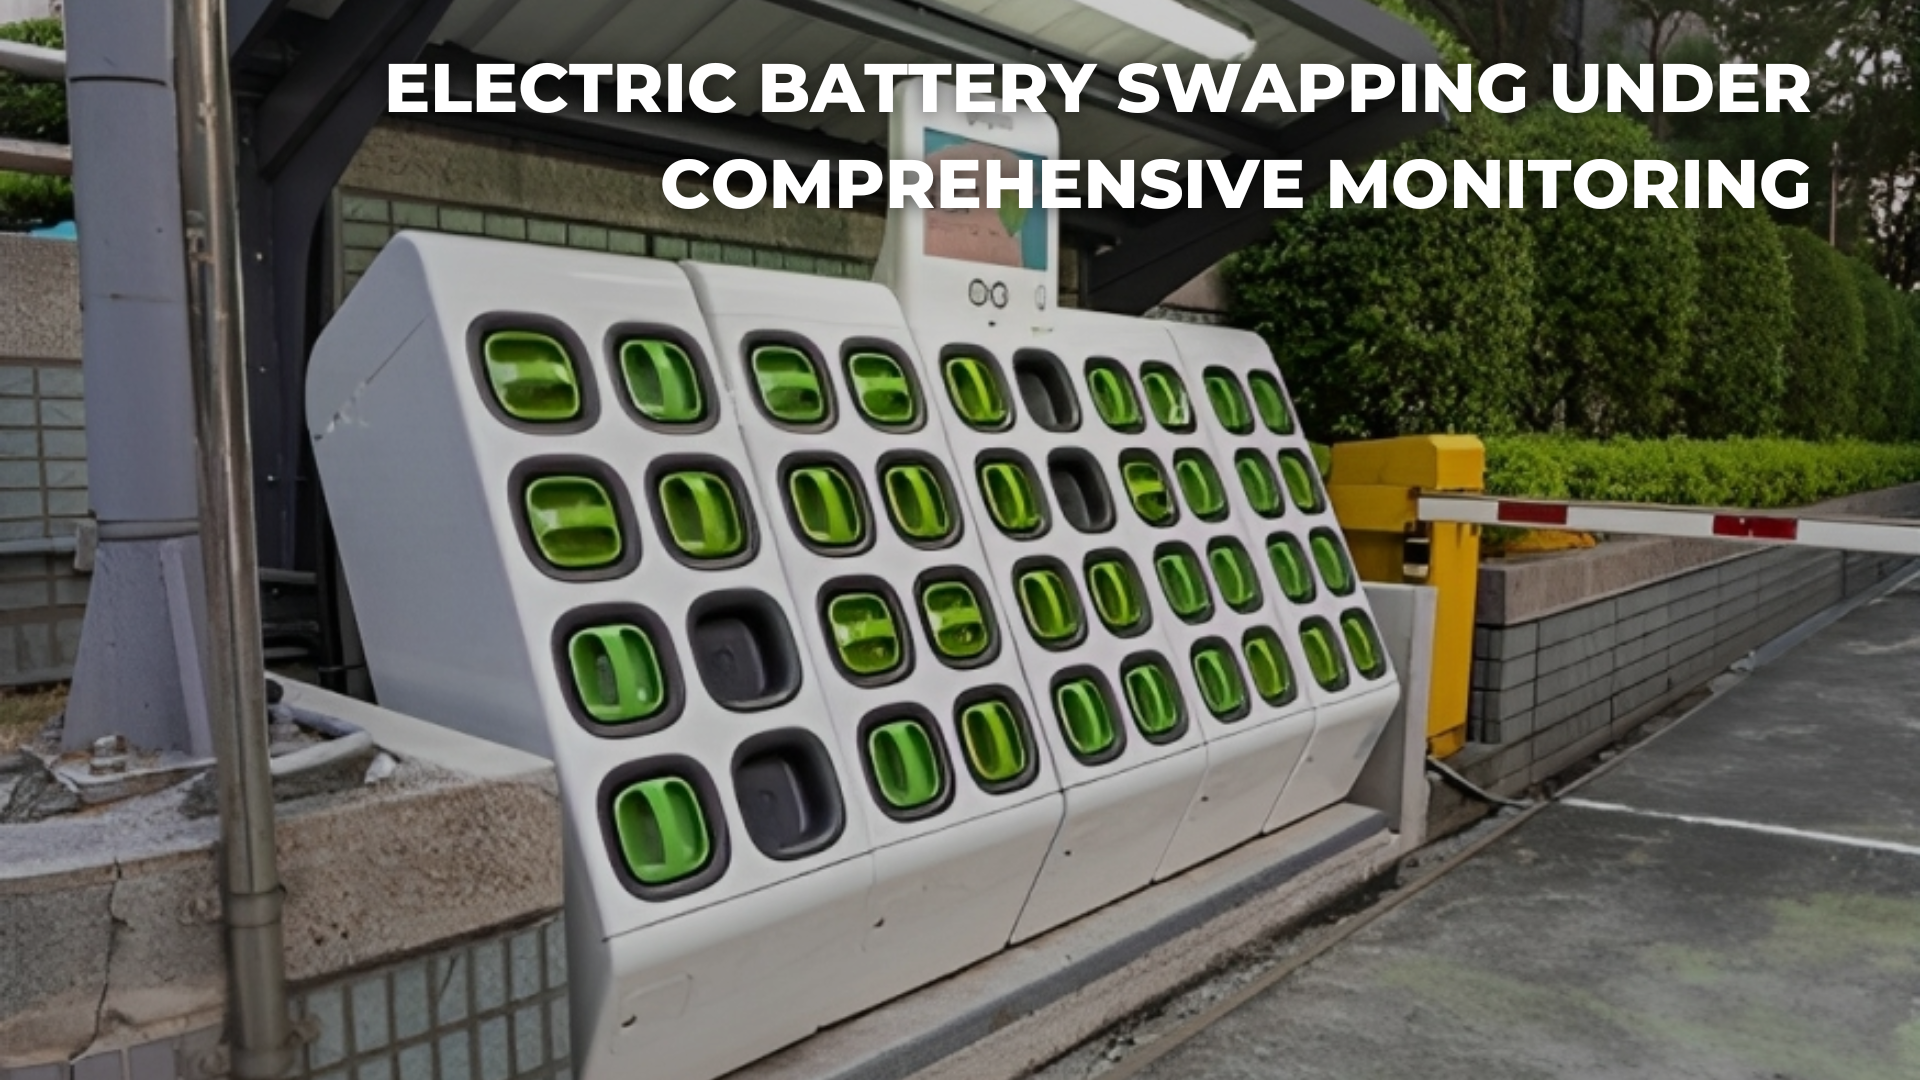 ELECTRIC BATTERY SWAPPING UNDER COMPREHENSIVE MONITORING